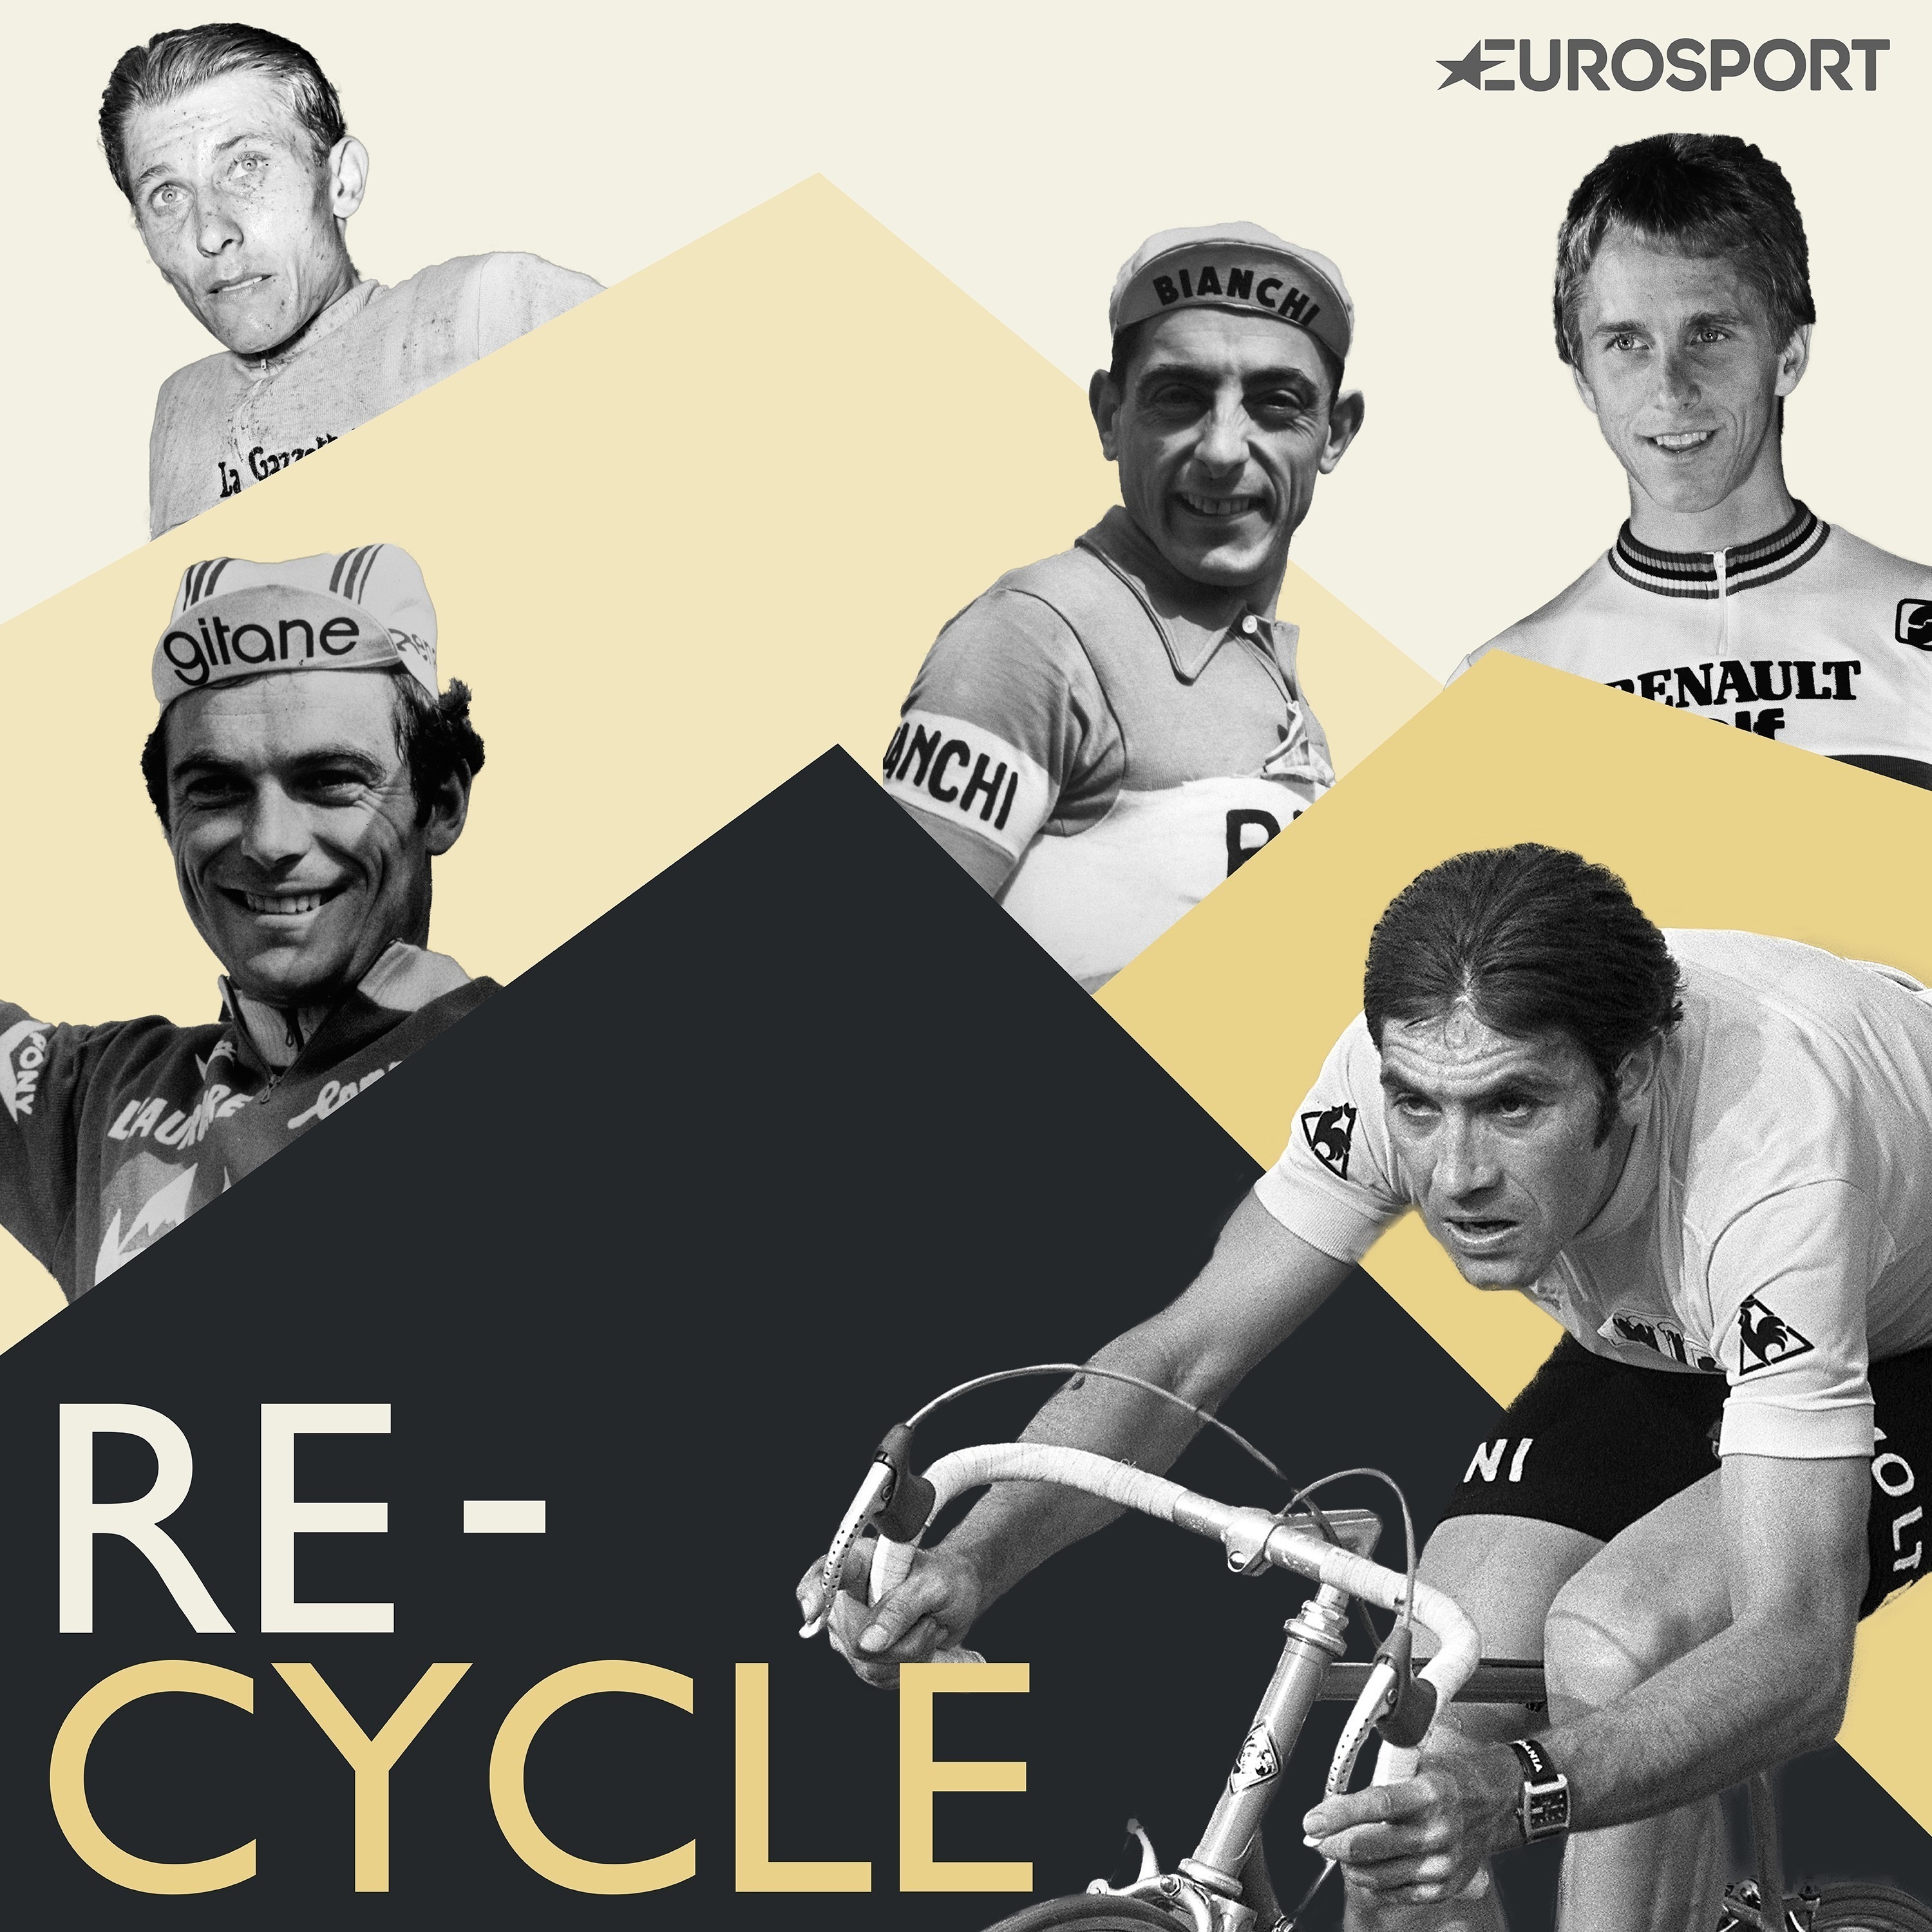 Introducing Re-Cycle: Triumph to tragedy with Frank Vandenbroucke